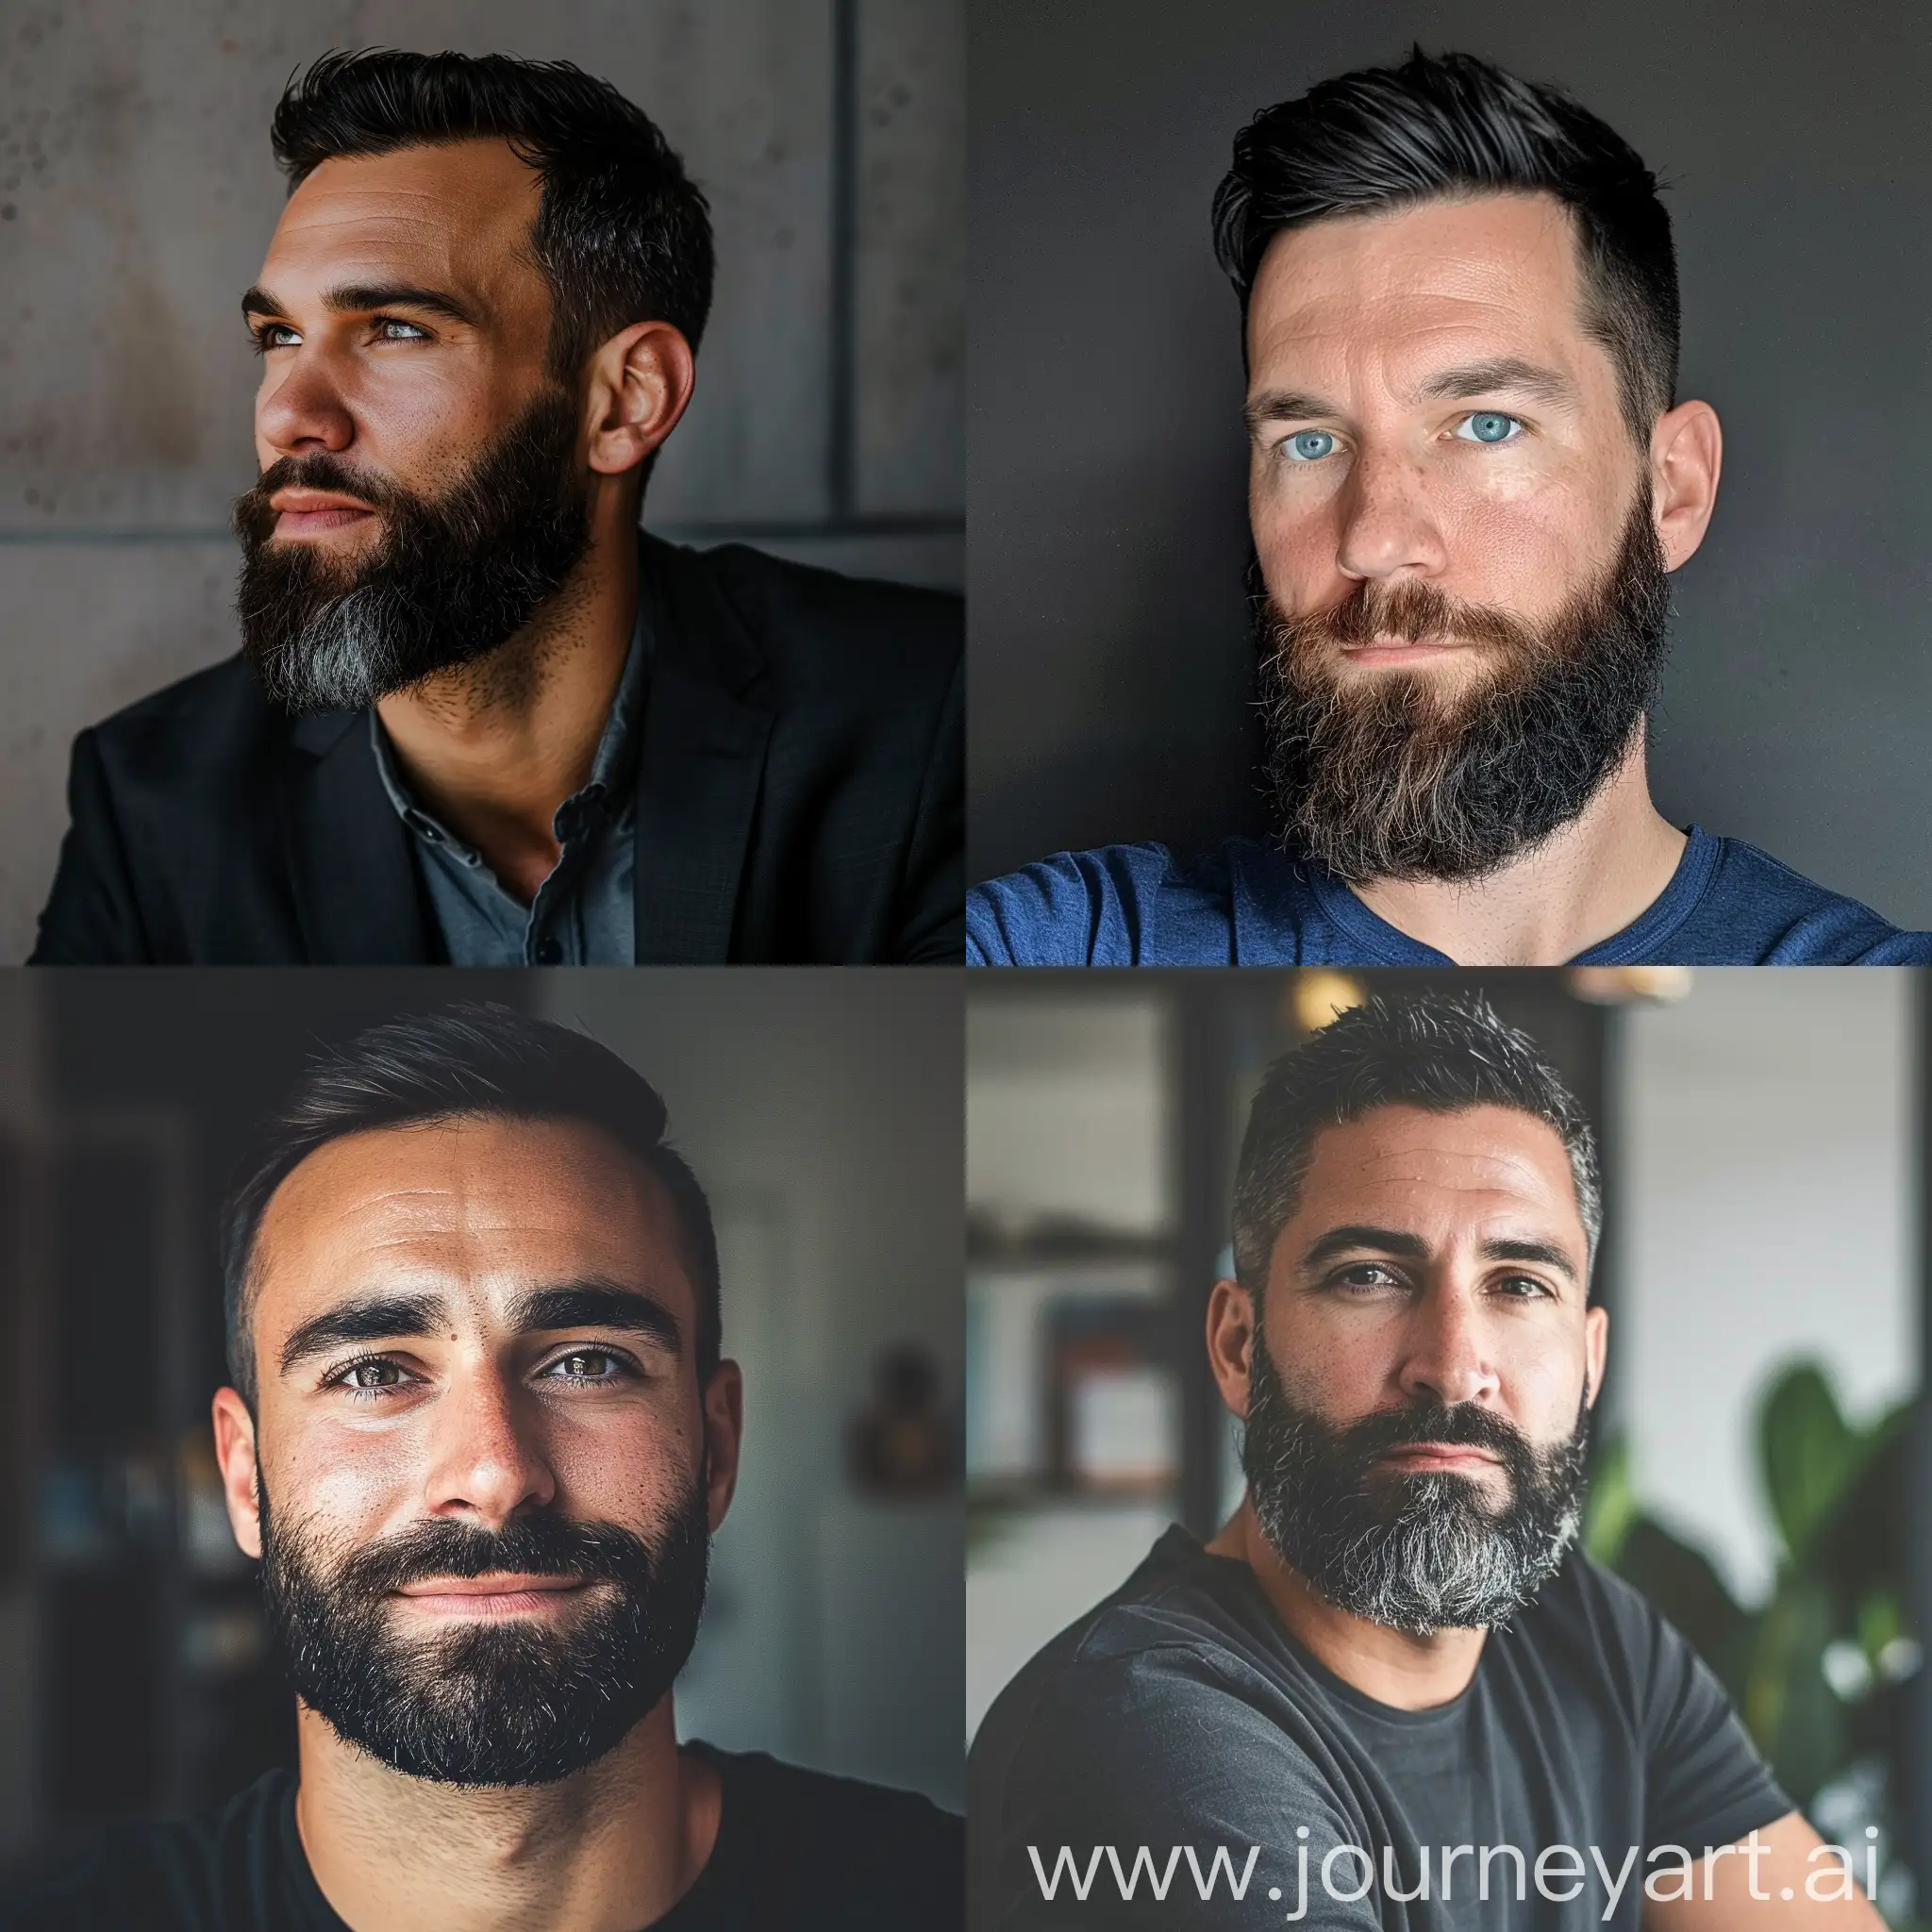 create linkedin profile picture, for digital marketing manager, male, mid 30s, short beard black